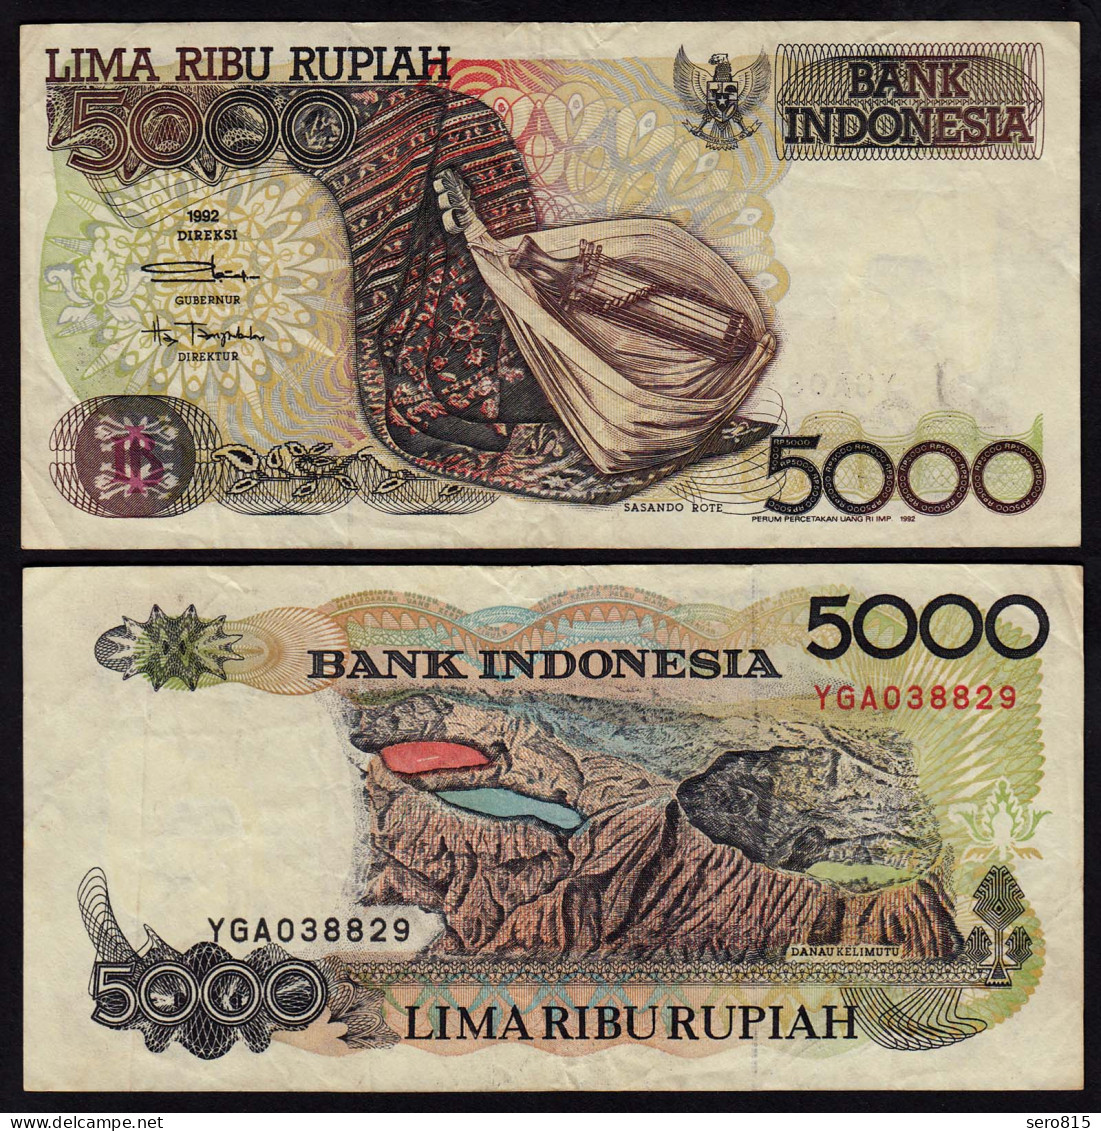 INDONESIEN - INDONESIA 5000 RUPIAH 1992/1992 Pick 130a VF (3)  (17939 - Other - Asia